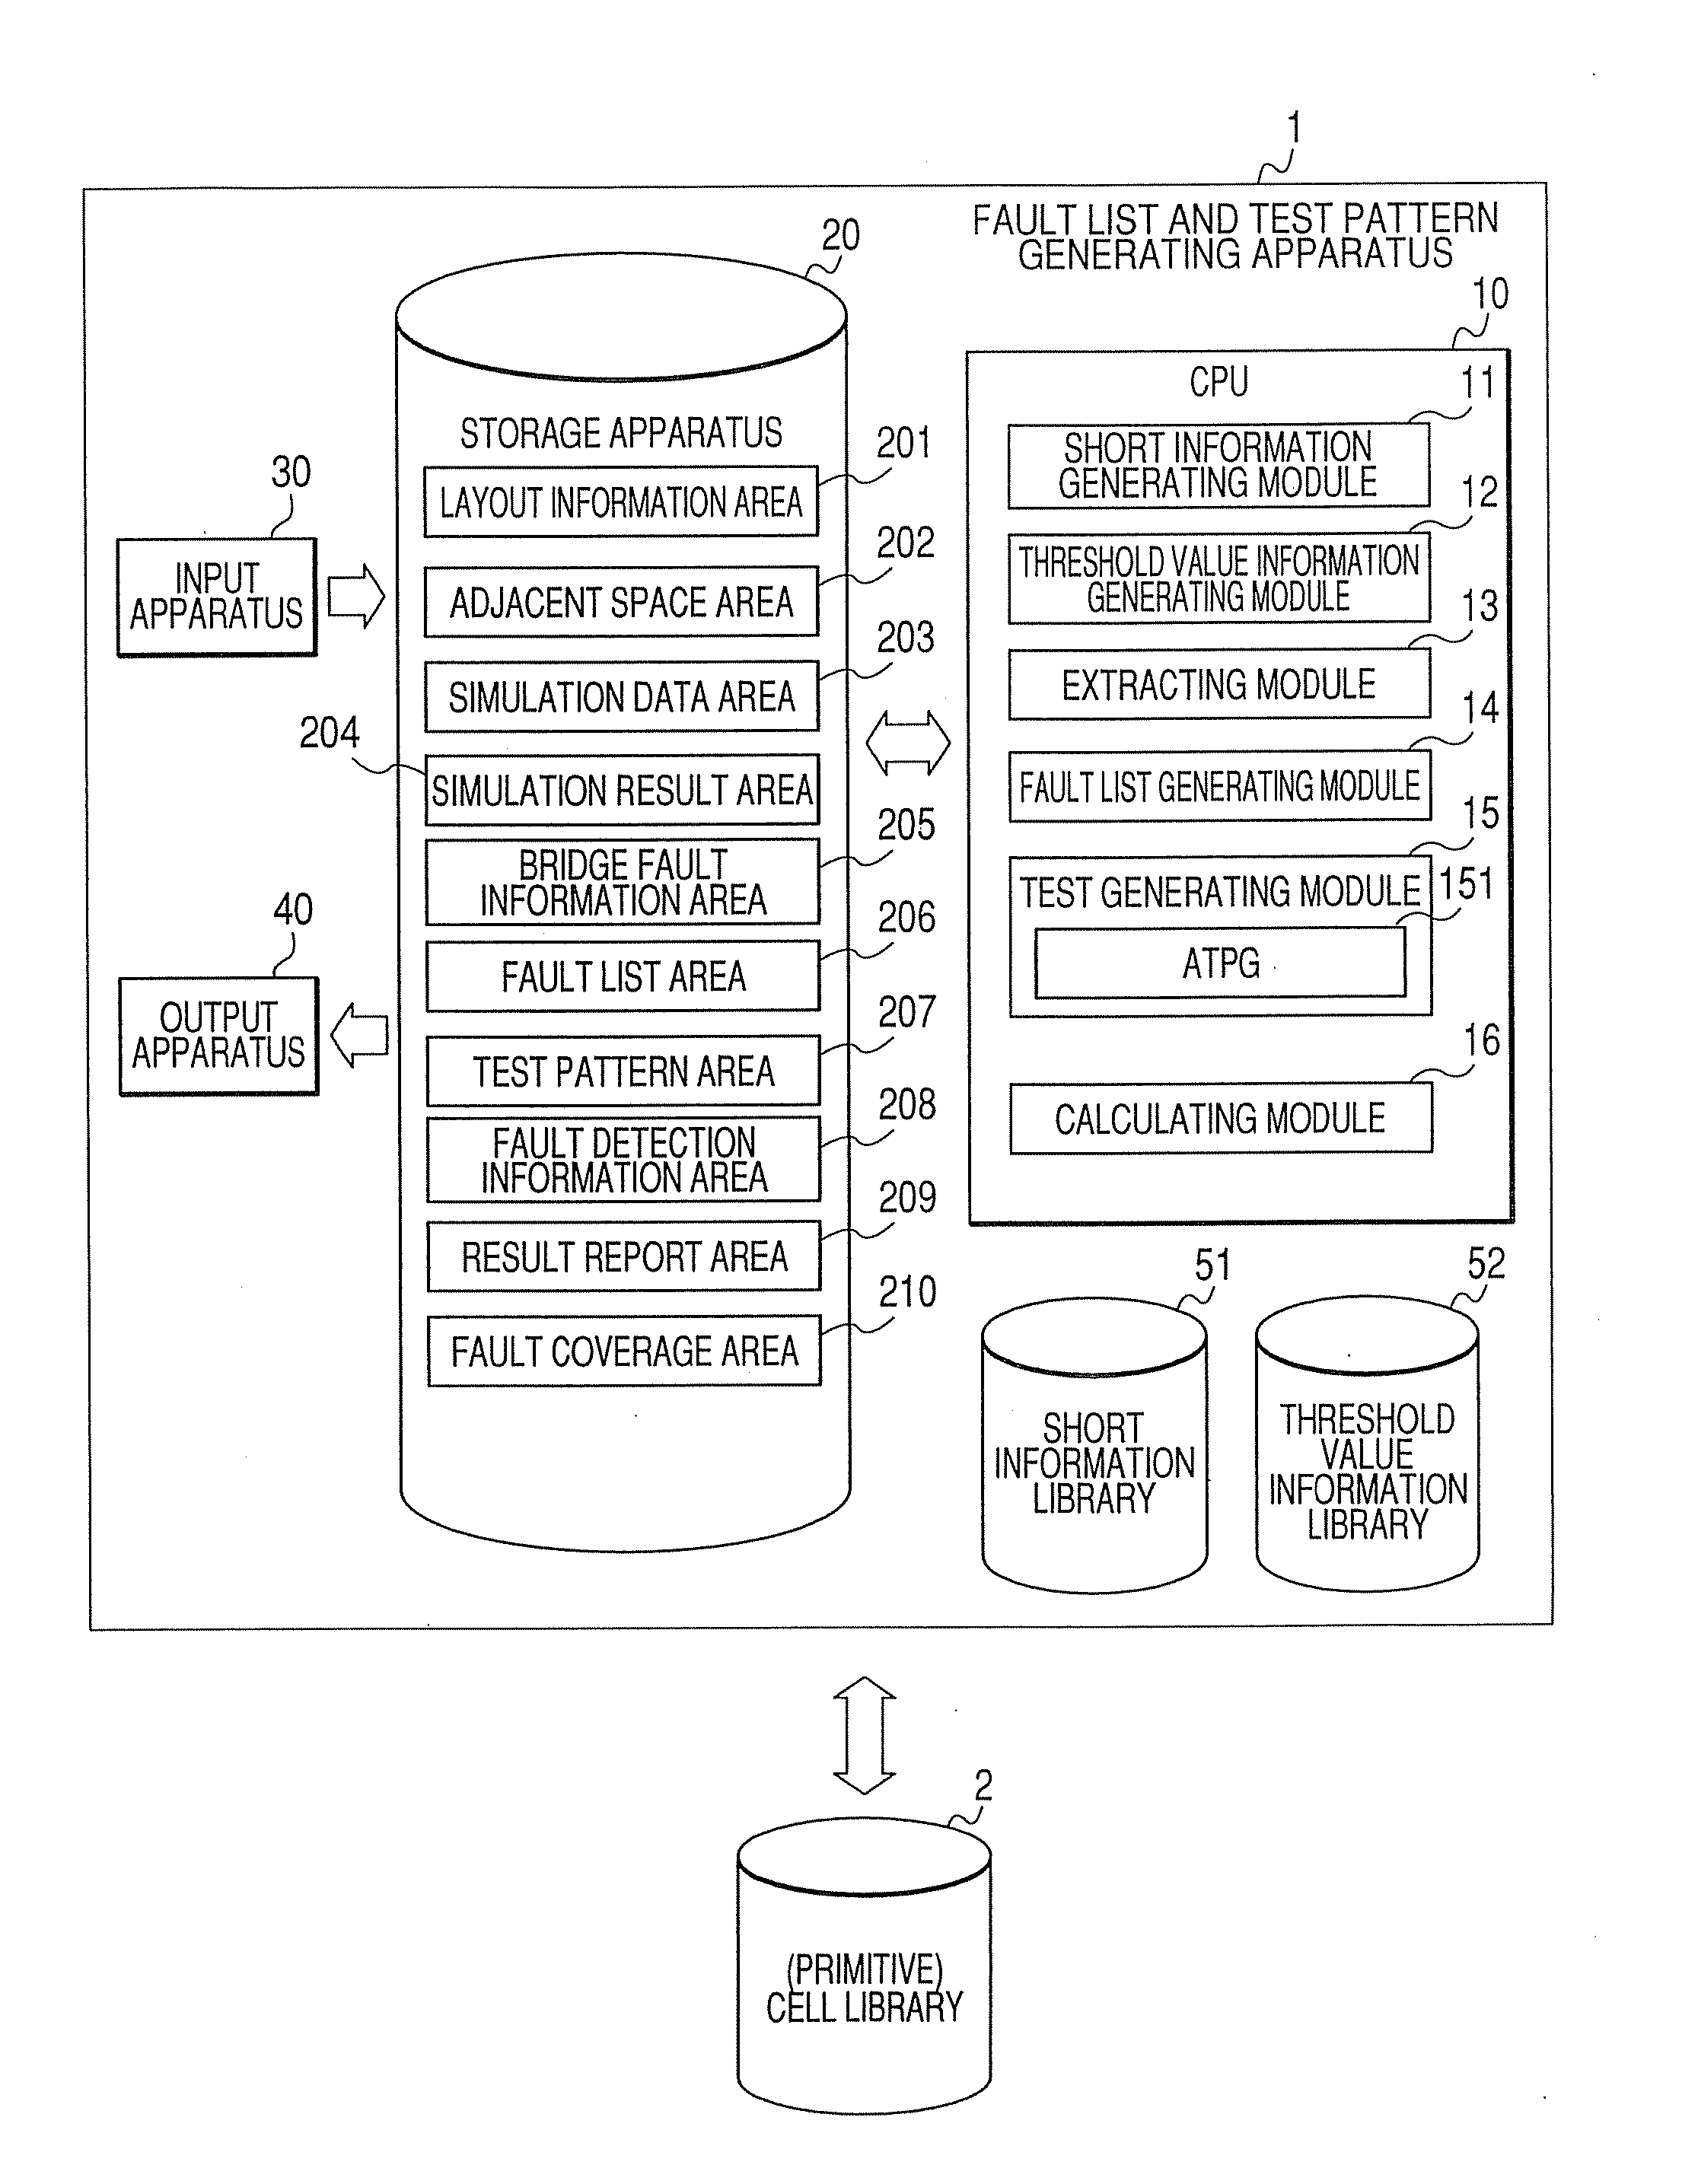 Fault list and test pattern generating apparatus and method, fault list generating and fault coverage calculating apparatus and method